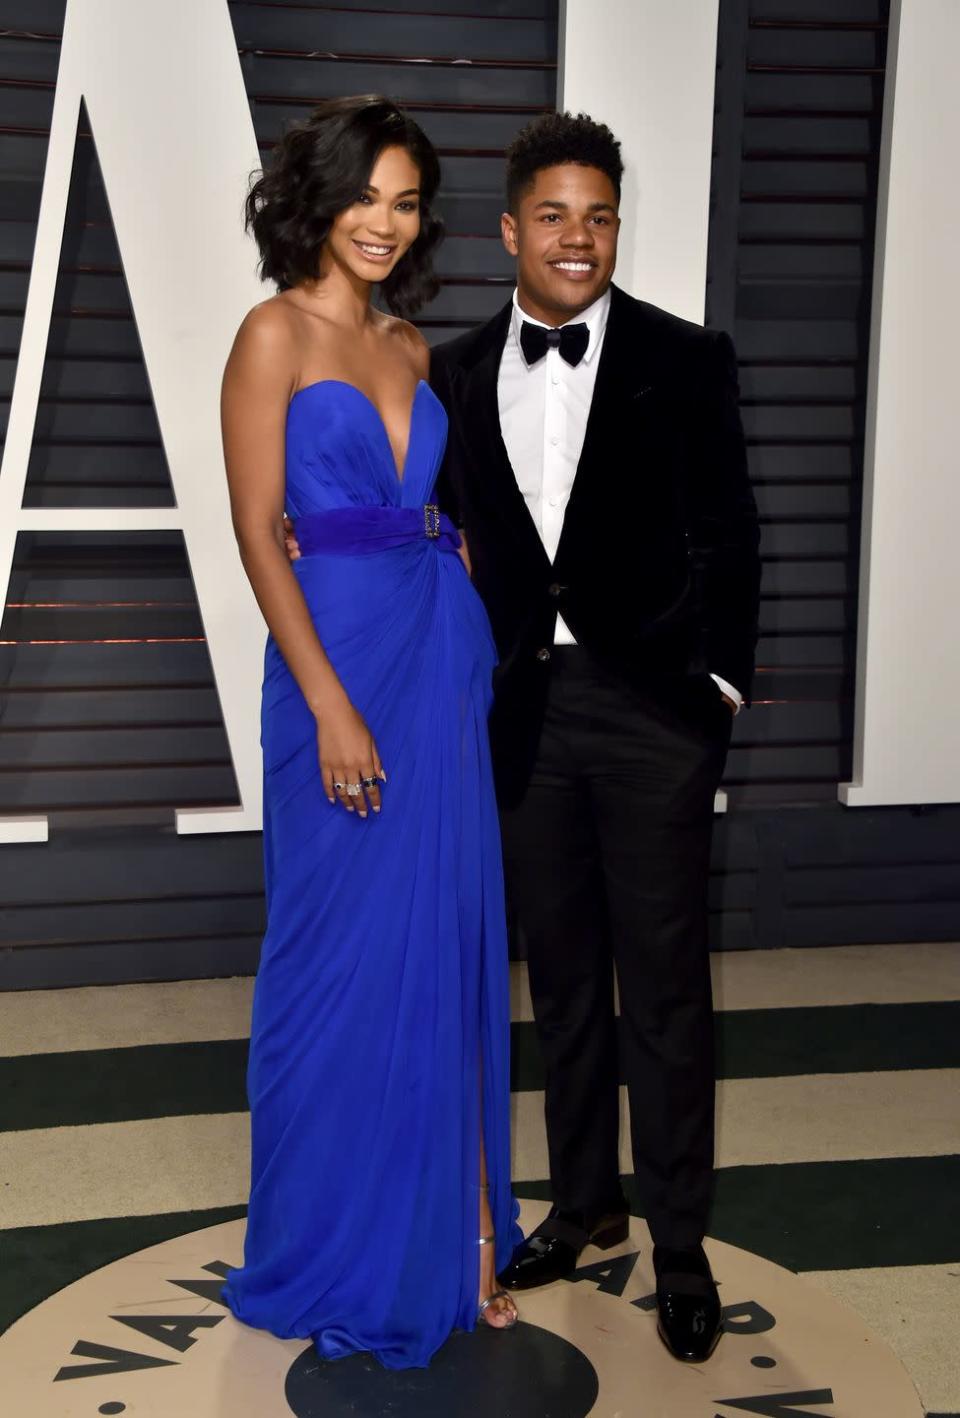 <p>News broke that the model and NFL player were parting ways in January 2022 (although Chanel had filed months before), and a source told <a href="https://www.eonline.com/news/1305368/chanel-iman-and-sterling-shepard-break-up-after-almost-4-years-of-marriage" rel="nofollow noopener" target="_blank" data-ylk="slk:E! News" class="link "><em>E! News</em></a>, “They have been rocky for a while now and are taking time apart. They are trying to work out their plan on how they will coparent their daughters peacefully.”</p>